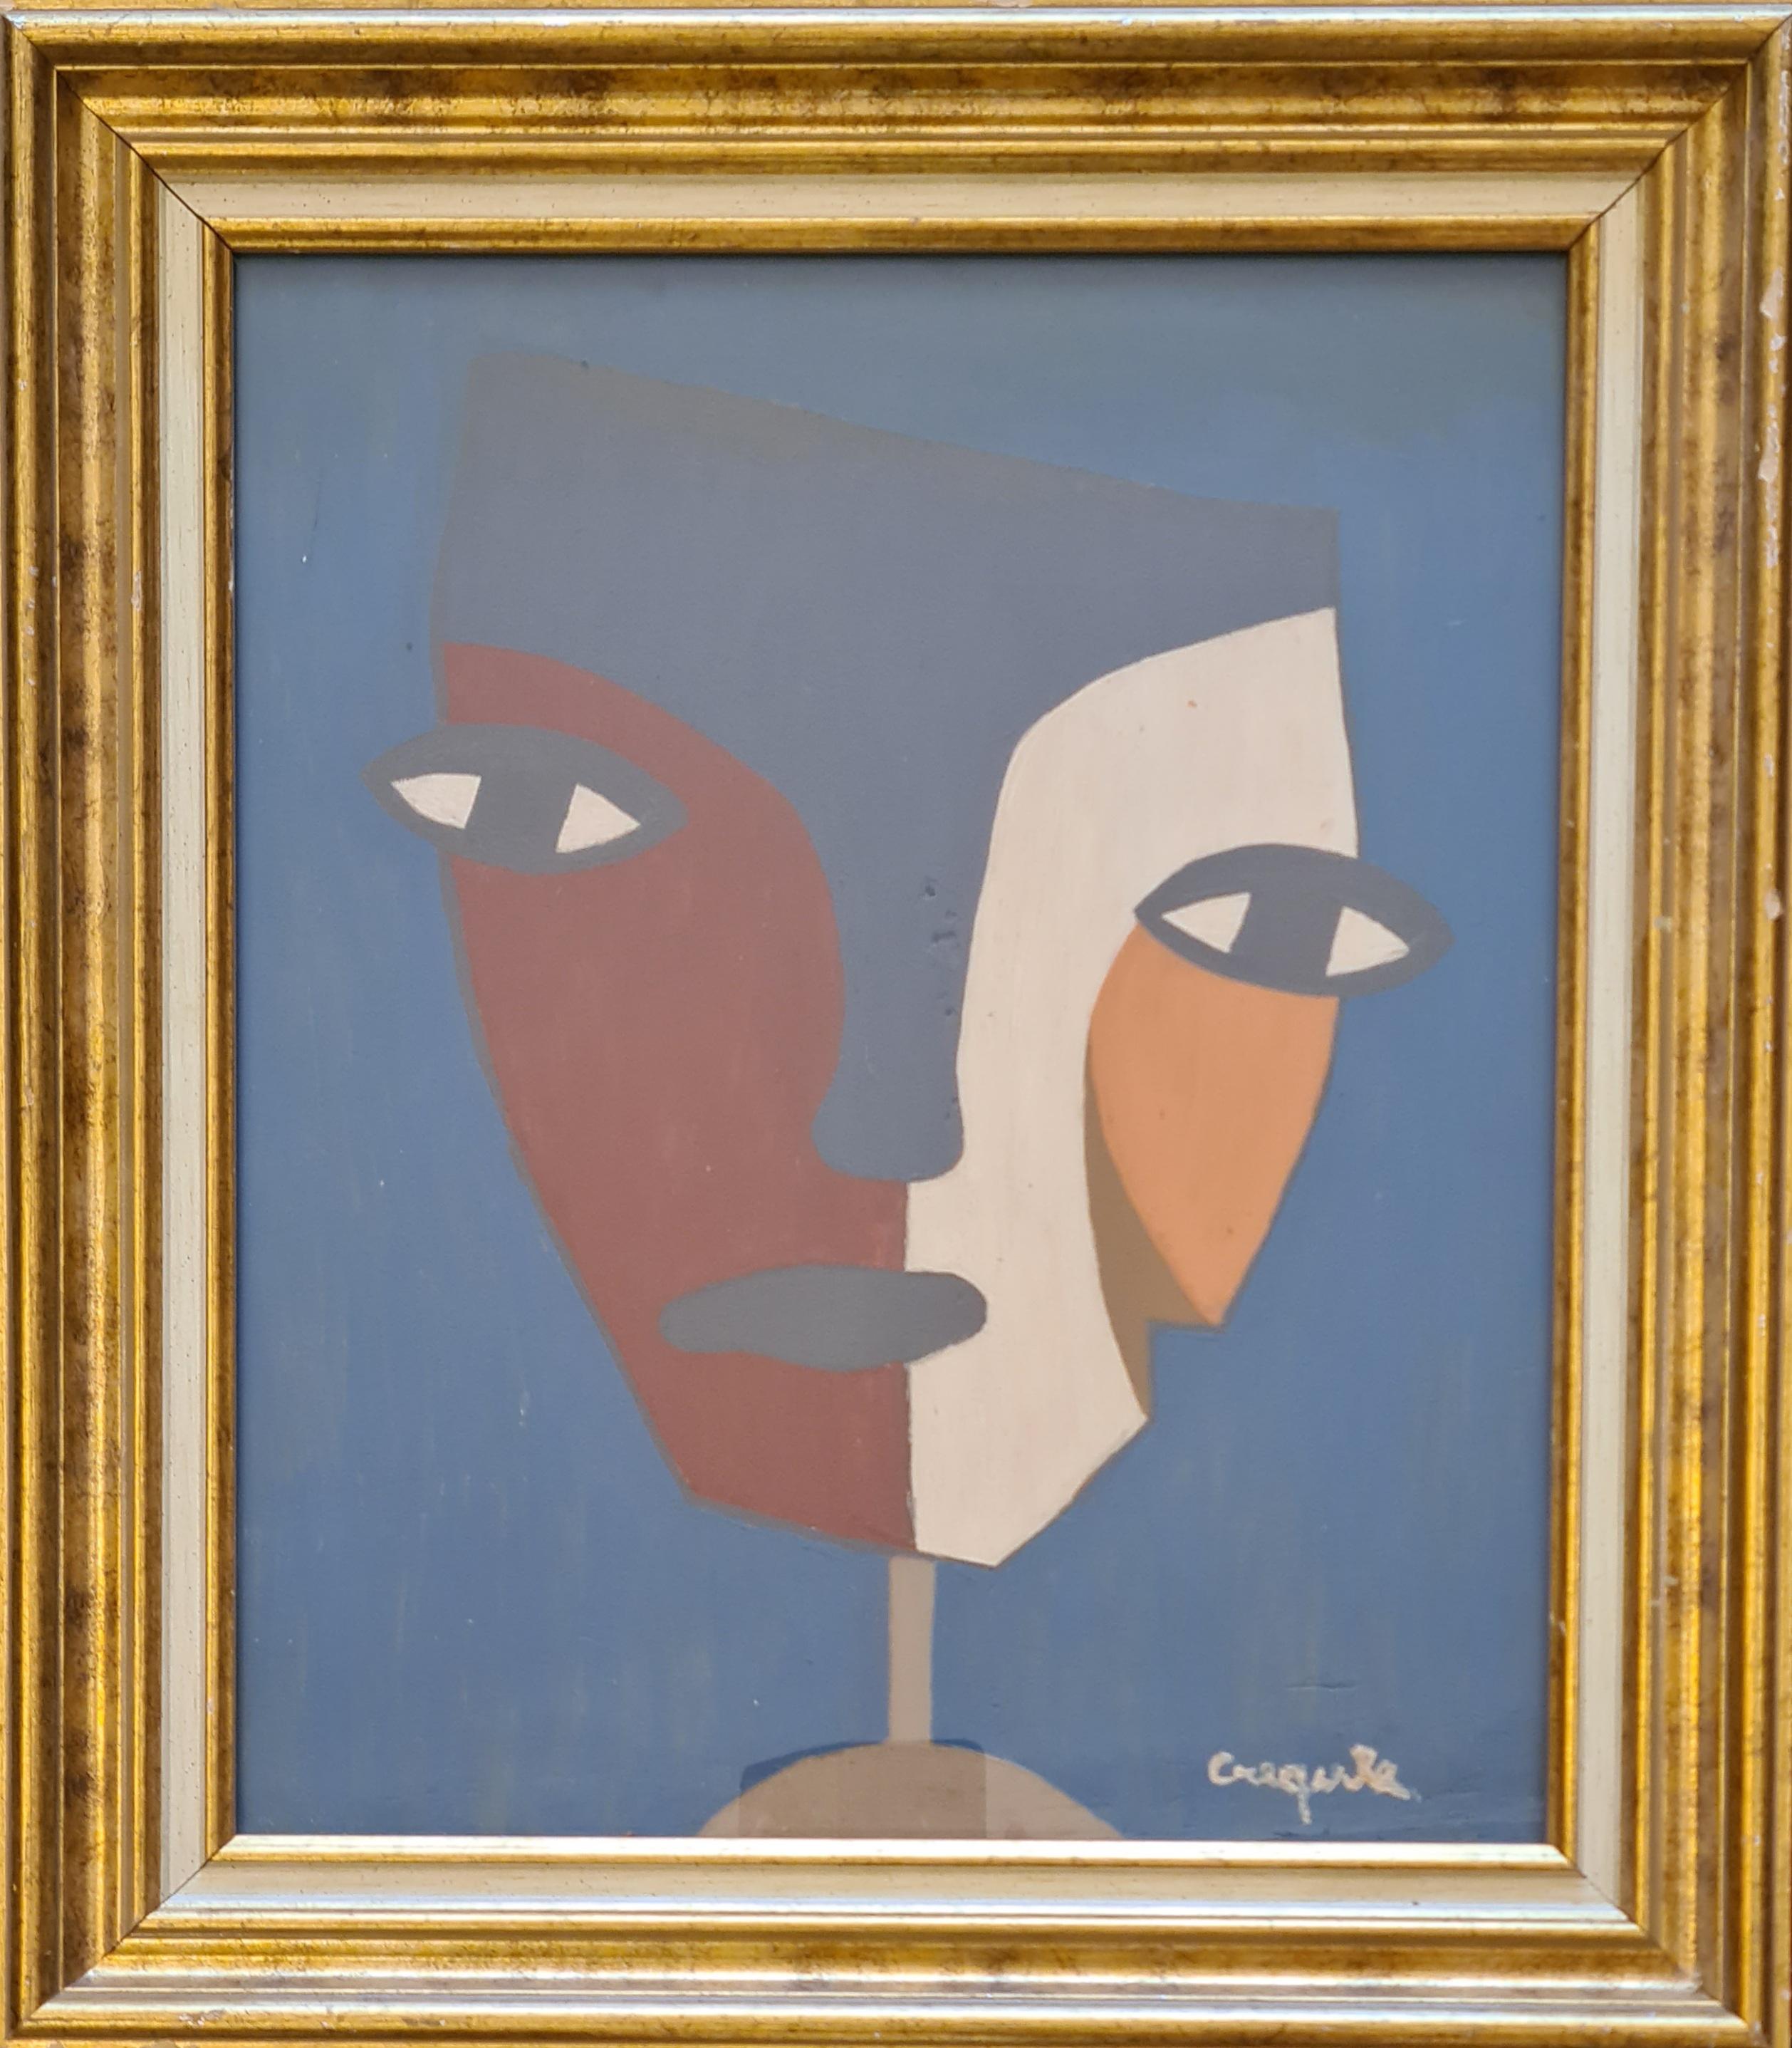 La Masque Africain, Hommage to Picasso and the European Modernists. - Painting by Créqule 